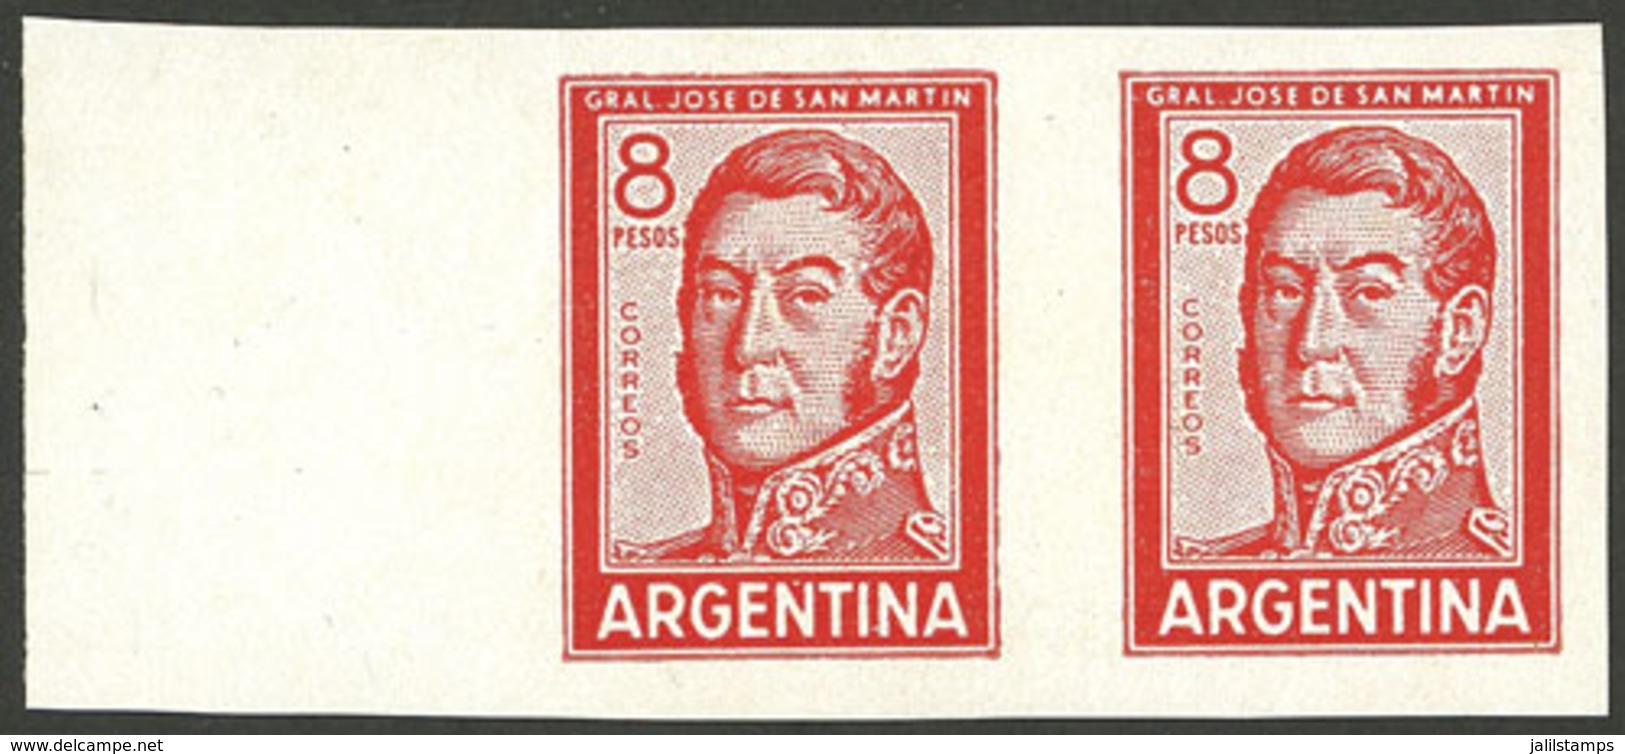 ARGENTINA: GJ.1307AP, 8P. San Martin Typographed, Rare IMPERFORATE PAIR Printed On Thick Paper Without Watermark, Only 1 - Neufs